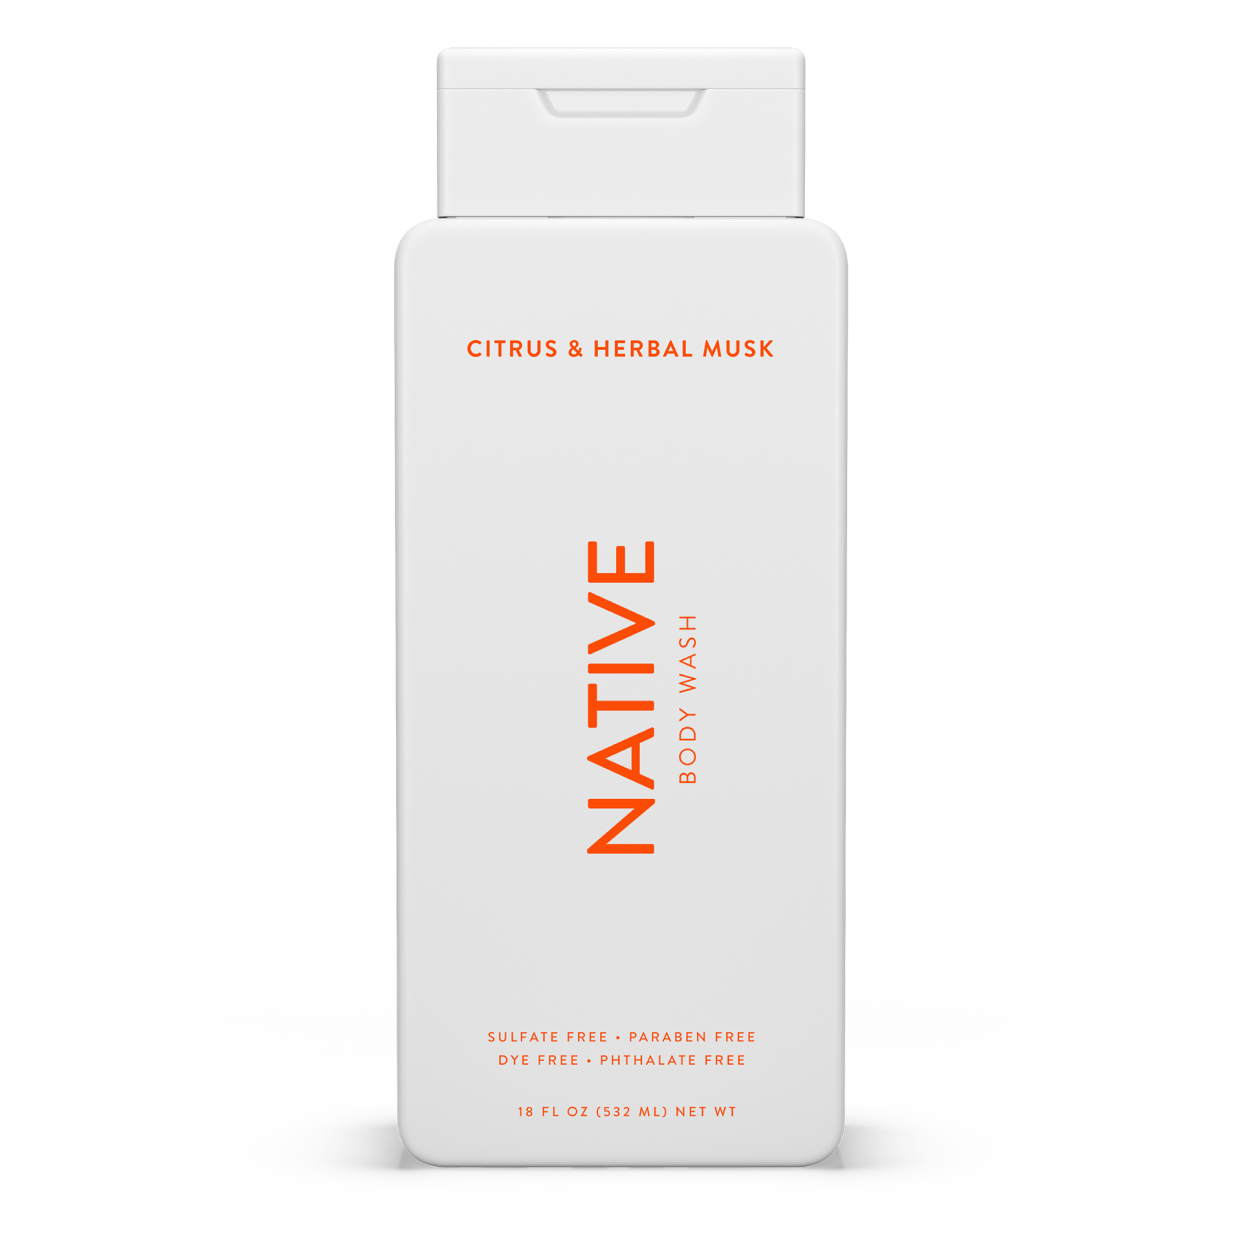 native body wash in citrus and musk